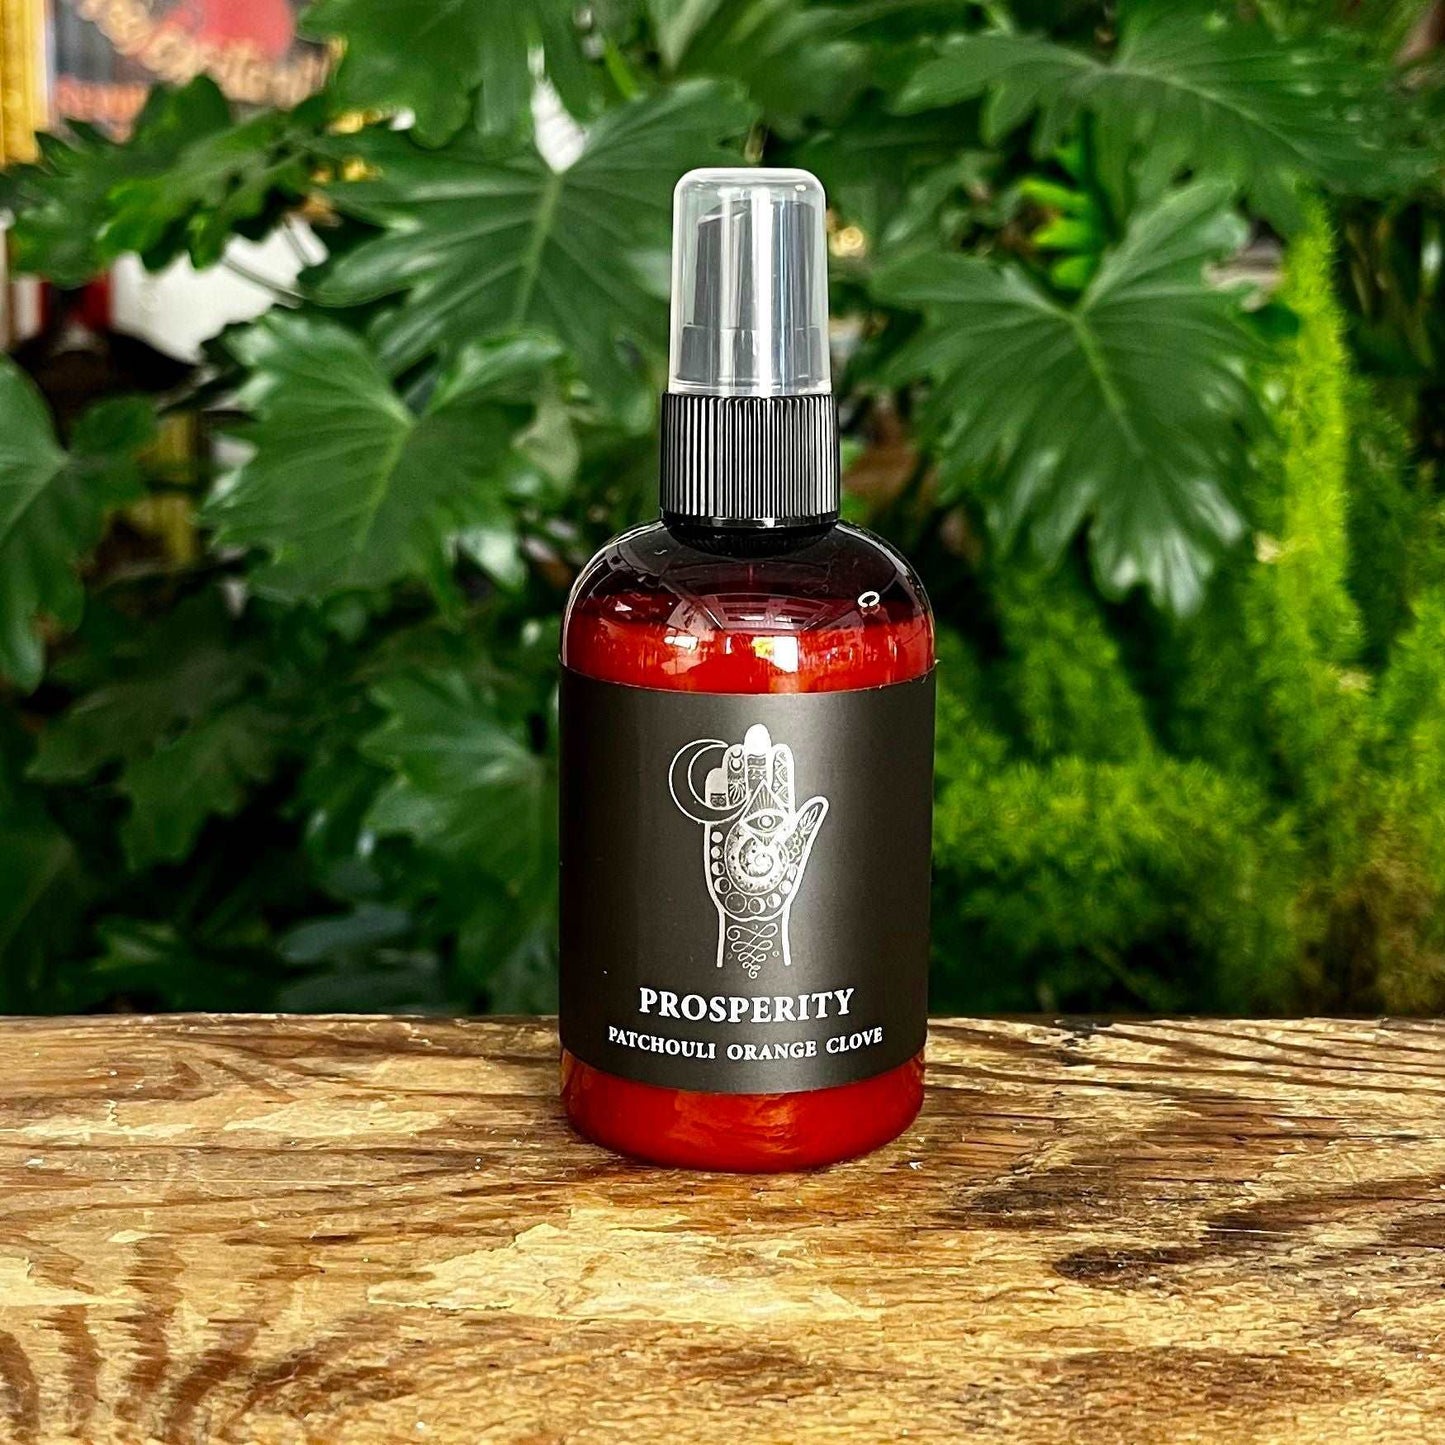 4 oz Prosperity Body Mist with Organic Essential Oils of Patchouli, Orange, and Clove, Infused with a Crystal for Abundance and Manifesting Goals